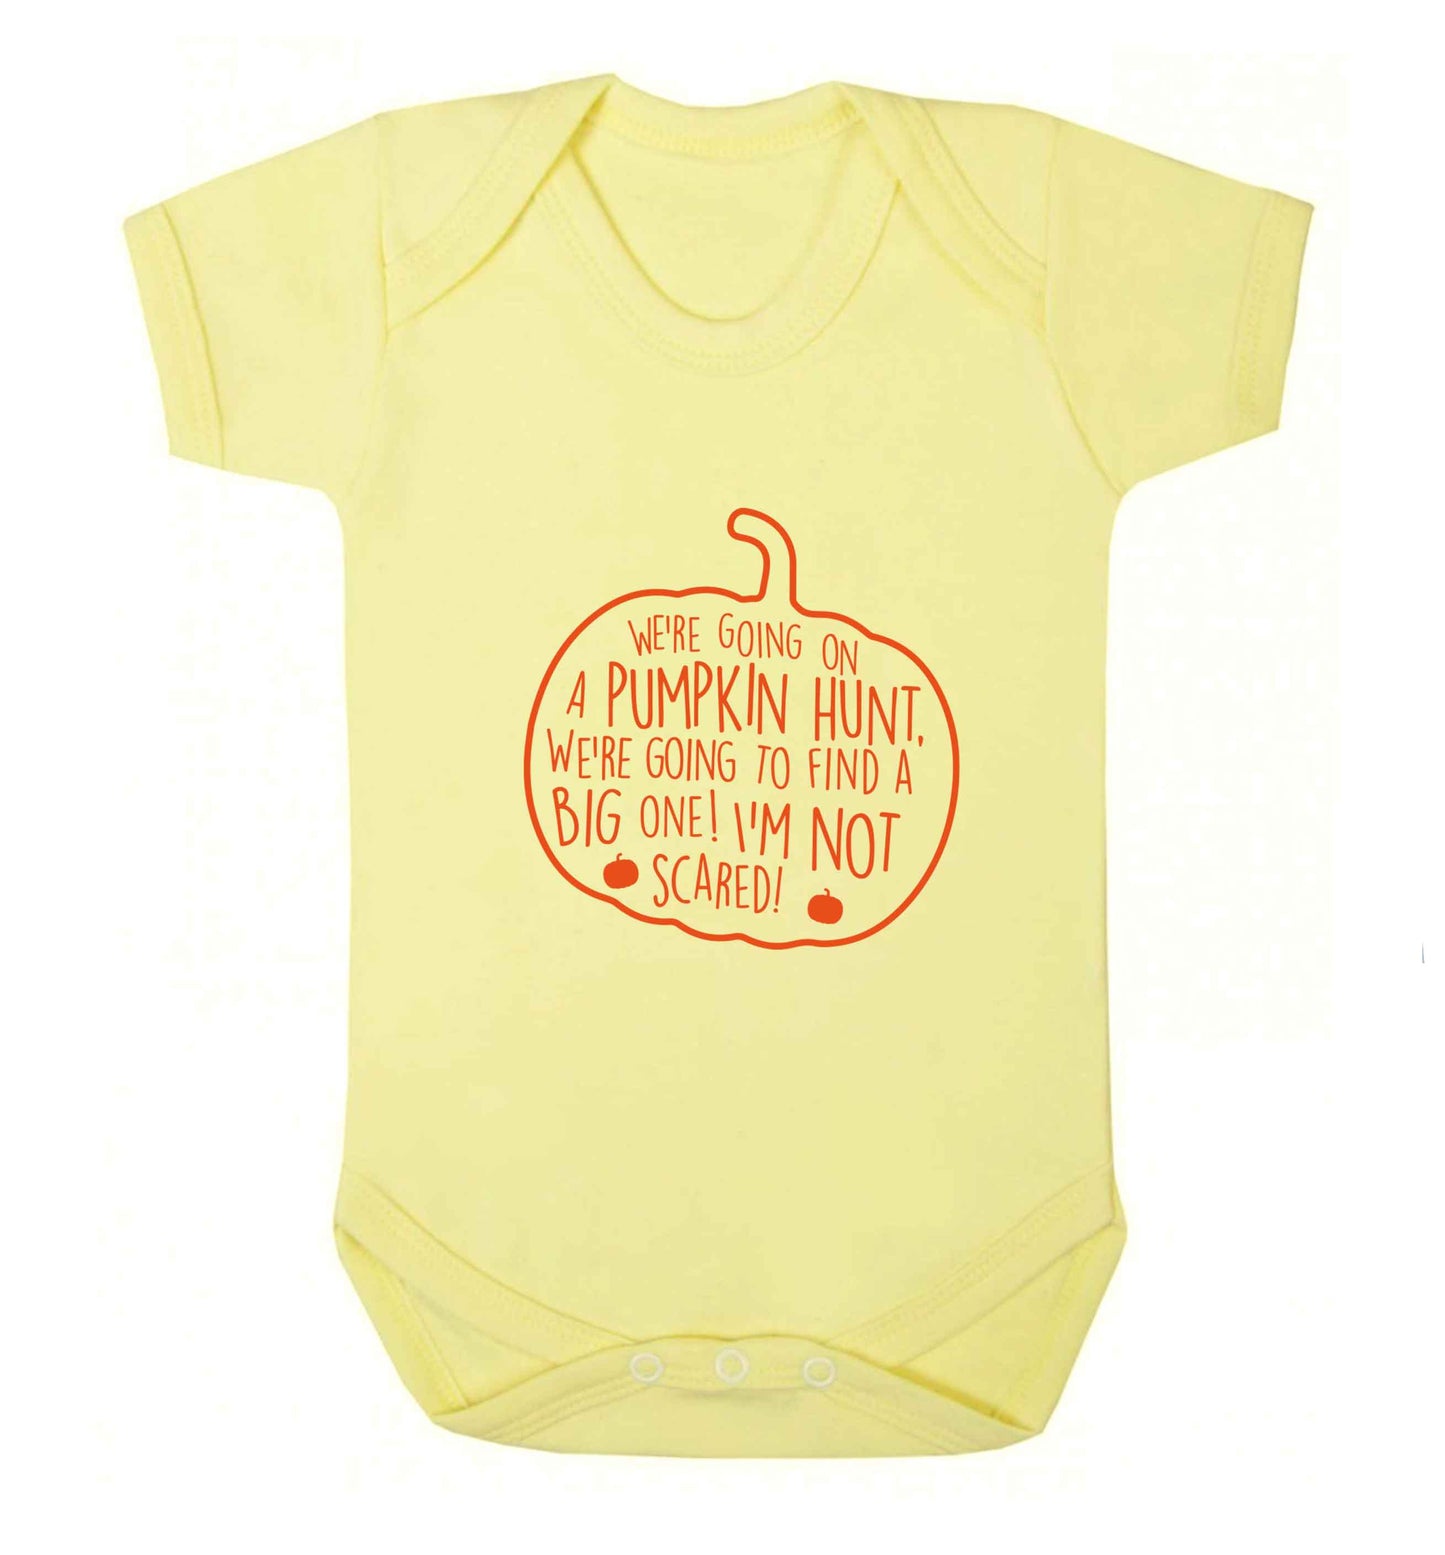 We're going on a pumpkin hunt baby vest pale yellow 18-24 months